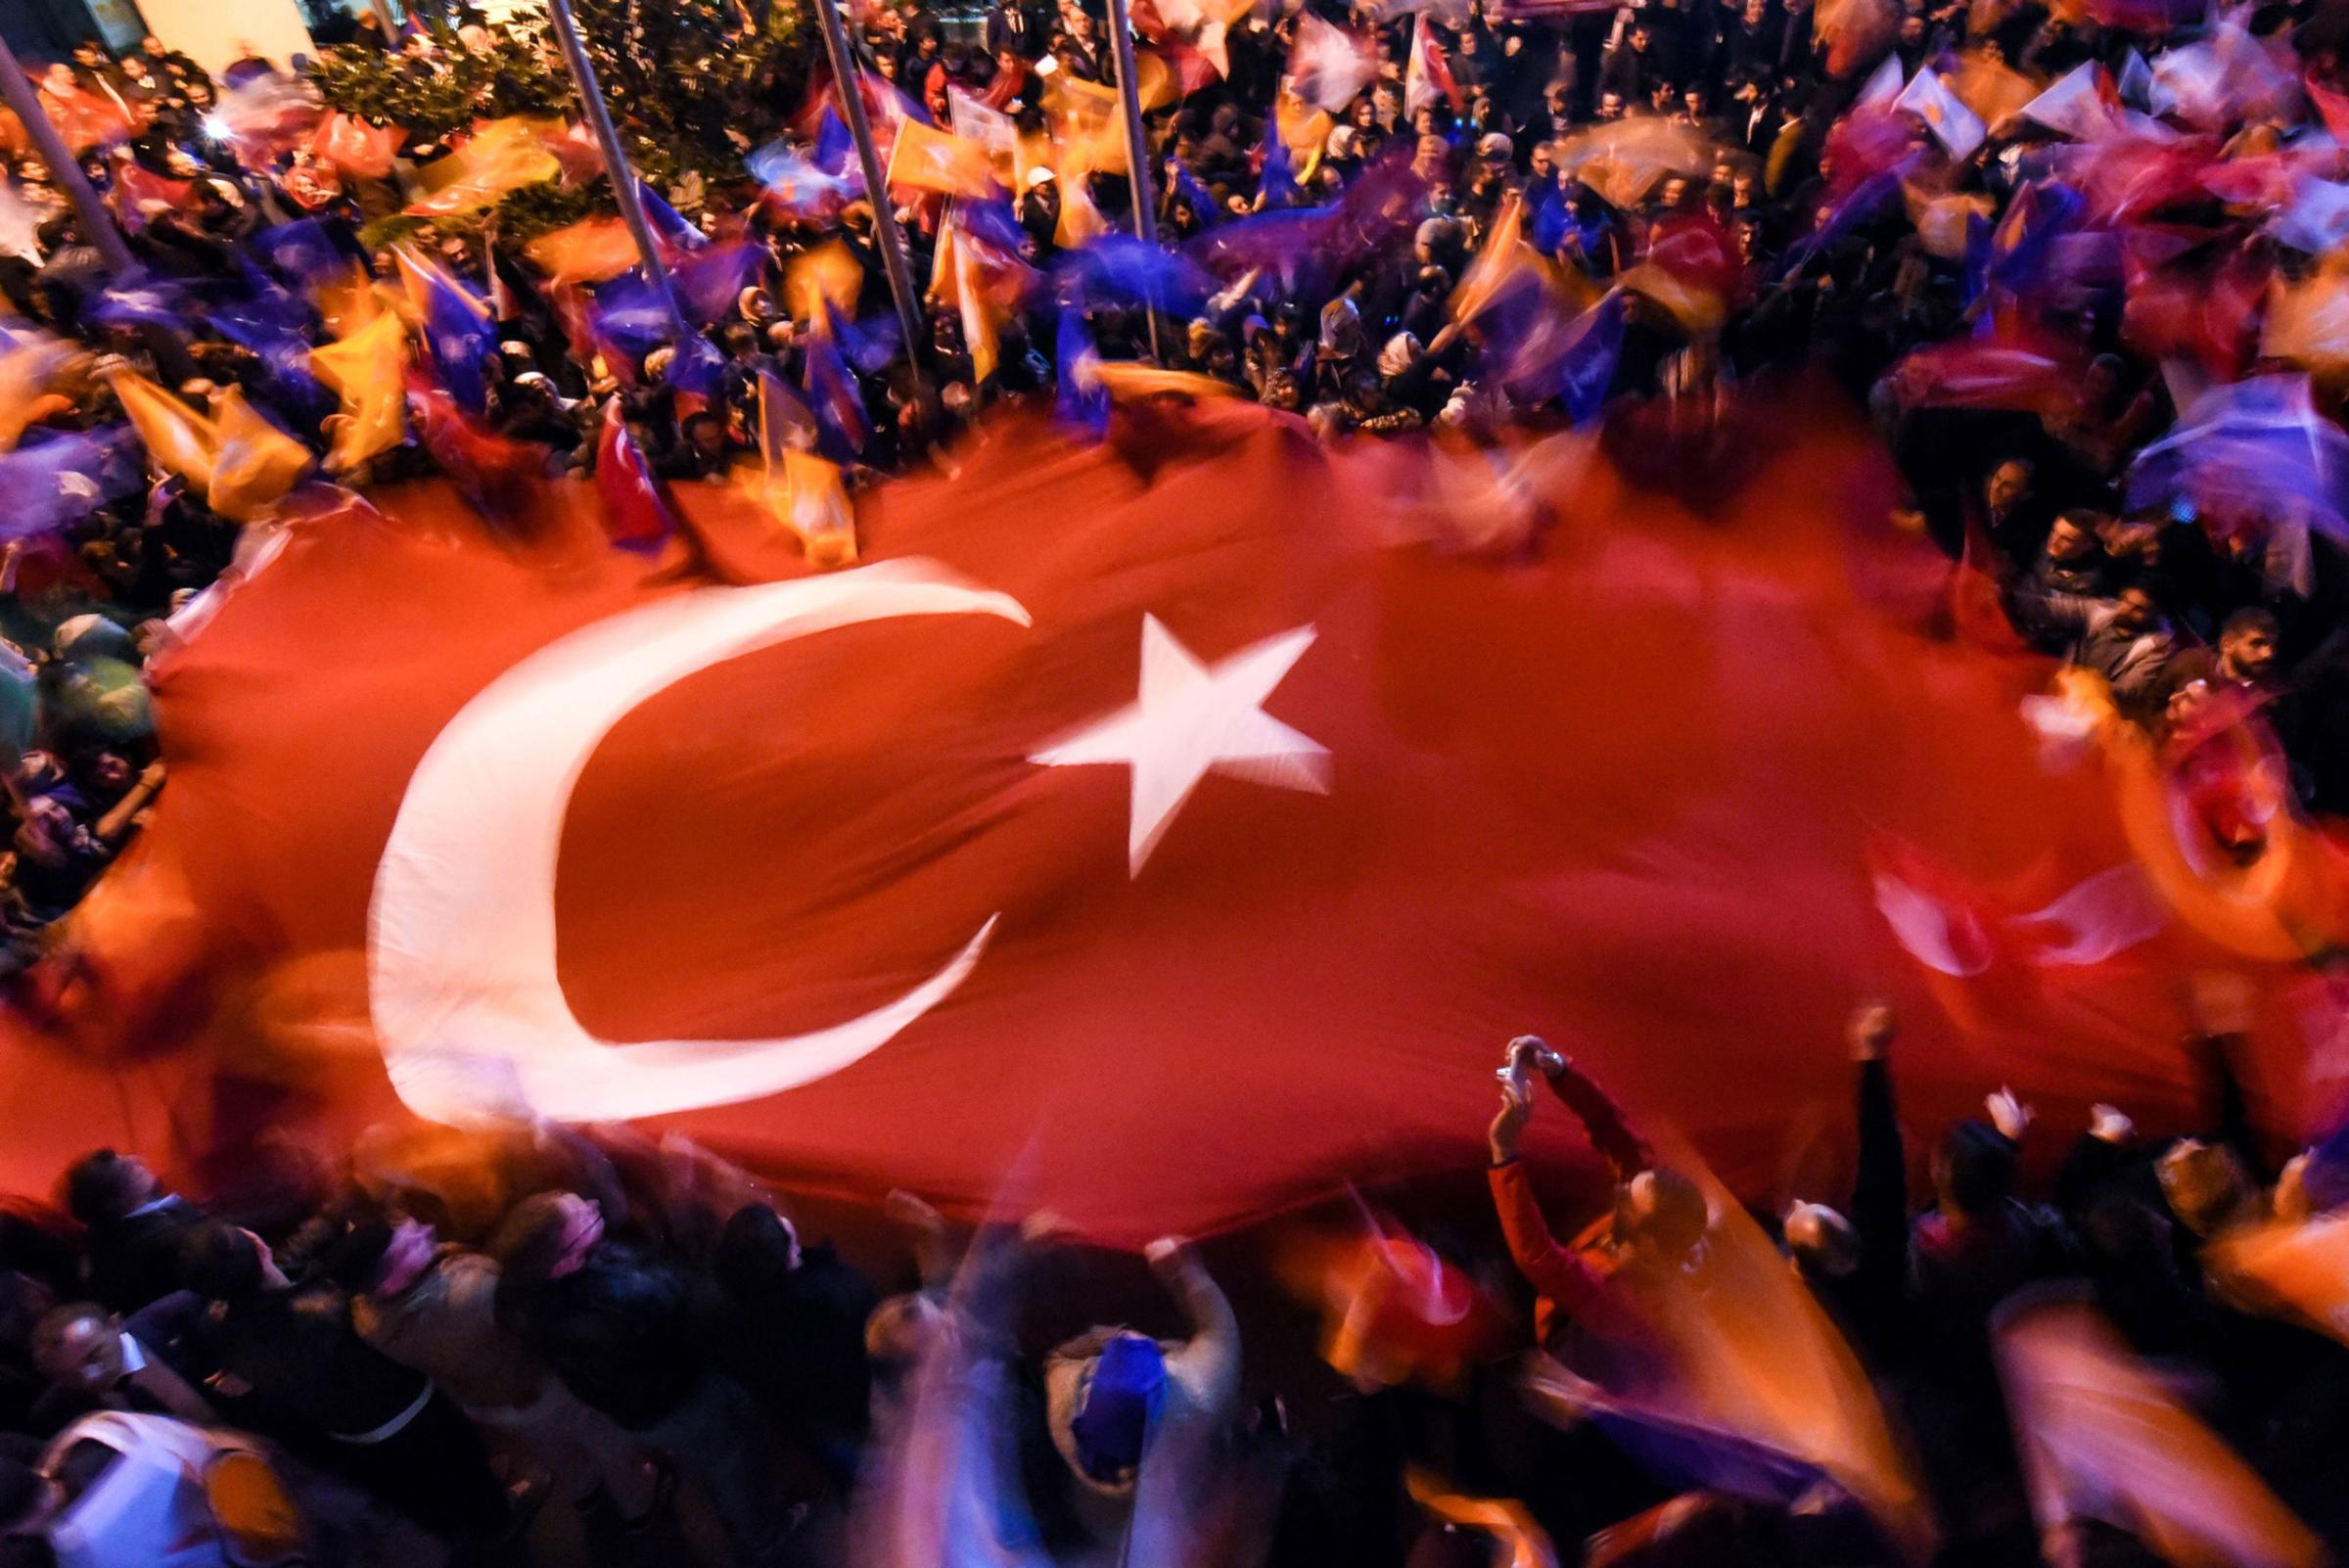 Supporters of Turkey's Justice and Development Party (AKP) wave a giant Turkish flag as they celebrate in Istanbul after the first results in the country's general election on November 1, 2015. Turkey's long-dominant Justice and Development Party (AKP) scored a stunning electoral comeback, regaining its parliamentary majority in a poll seen as crucial for the future of the troubled country. AFP PHOTO / OZAN KOSEOZAN KOSE/AFP/Getty Images